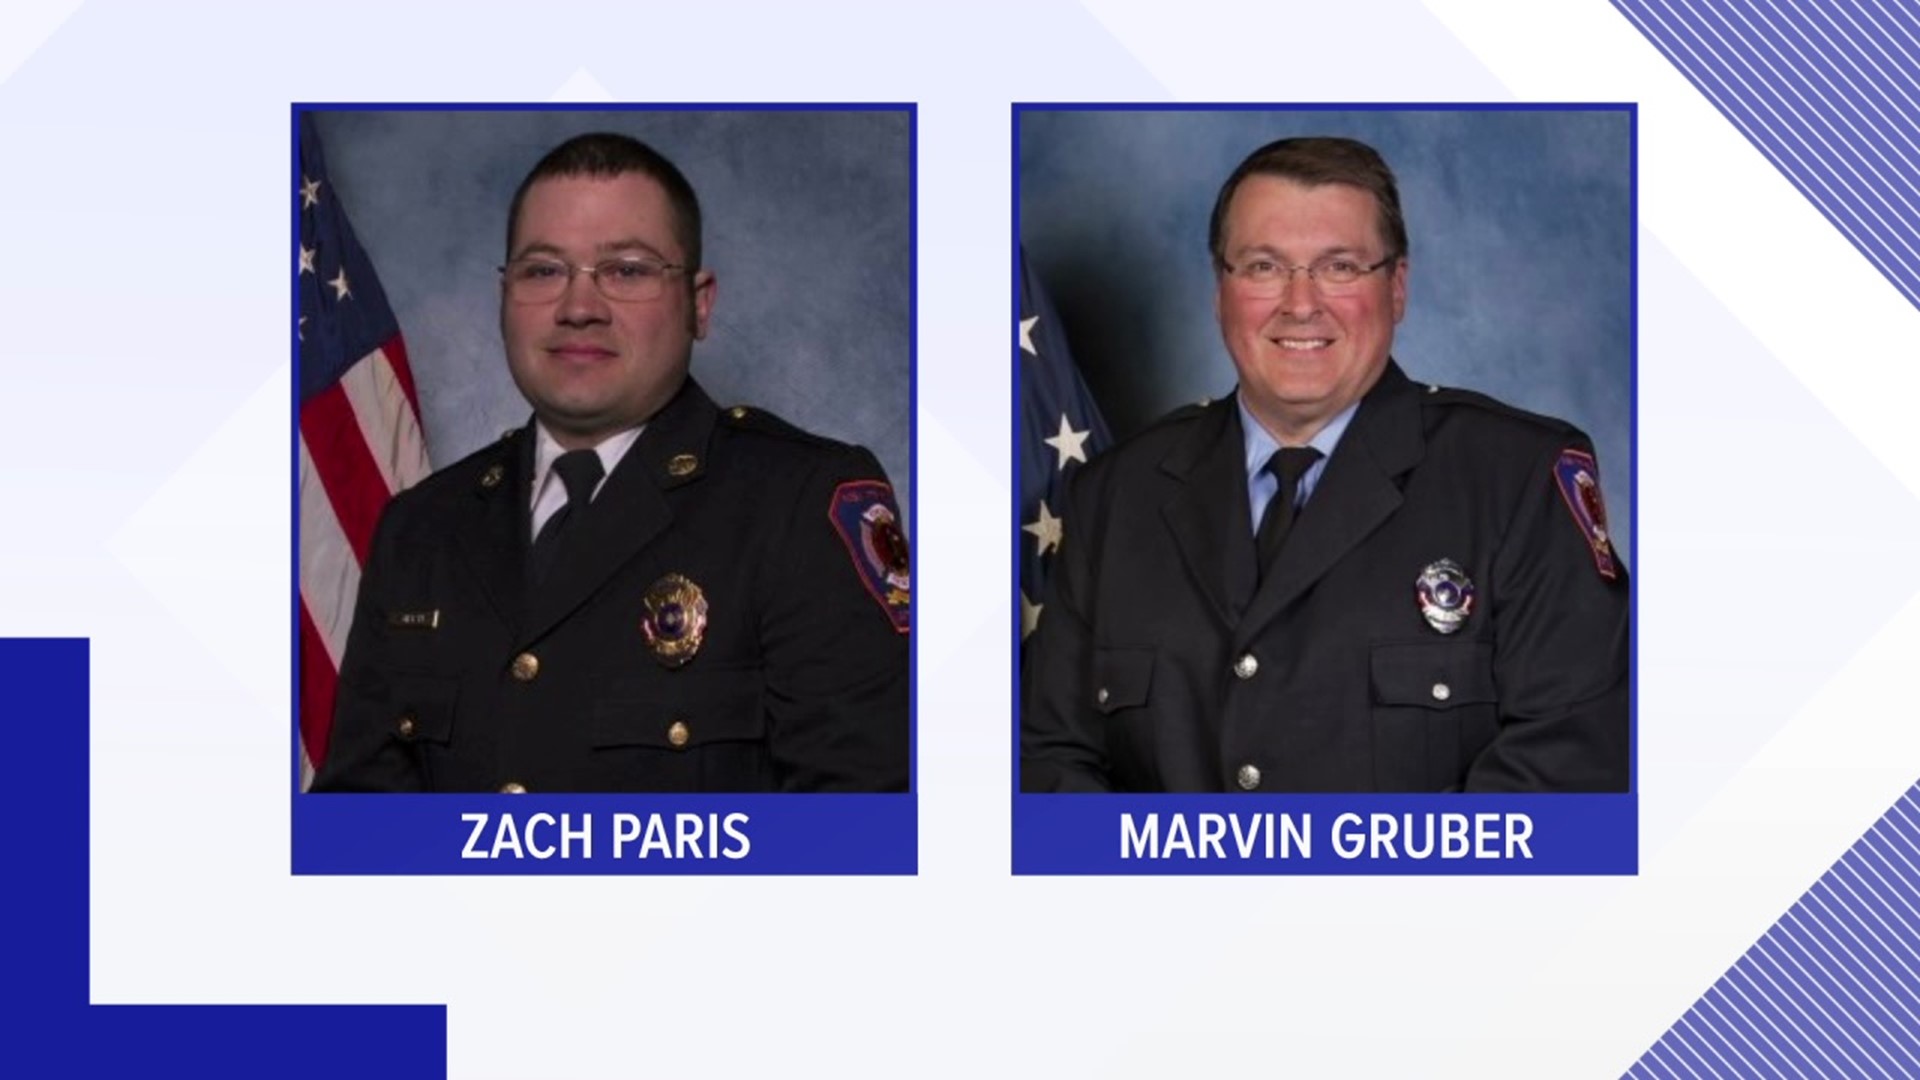 Funeral arrangements for Zachary Paris and Marvin Gruber who were killed in Wednesday's fire in Schuylkill County were announced Saturday.